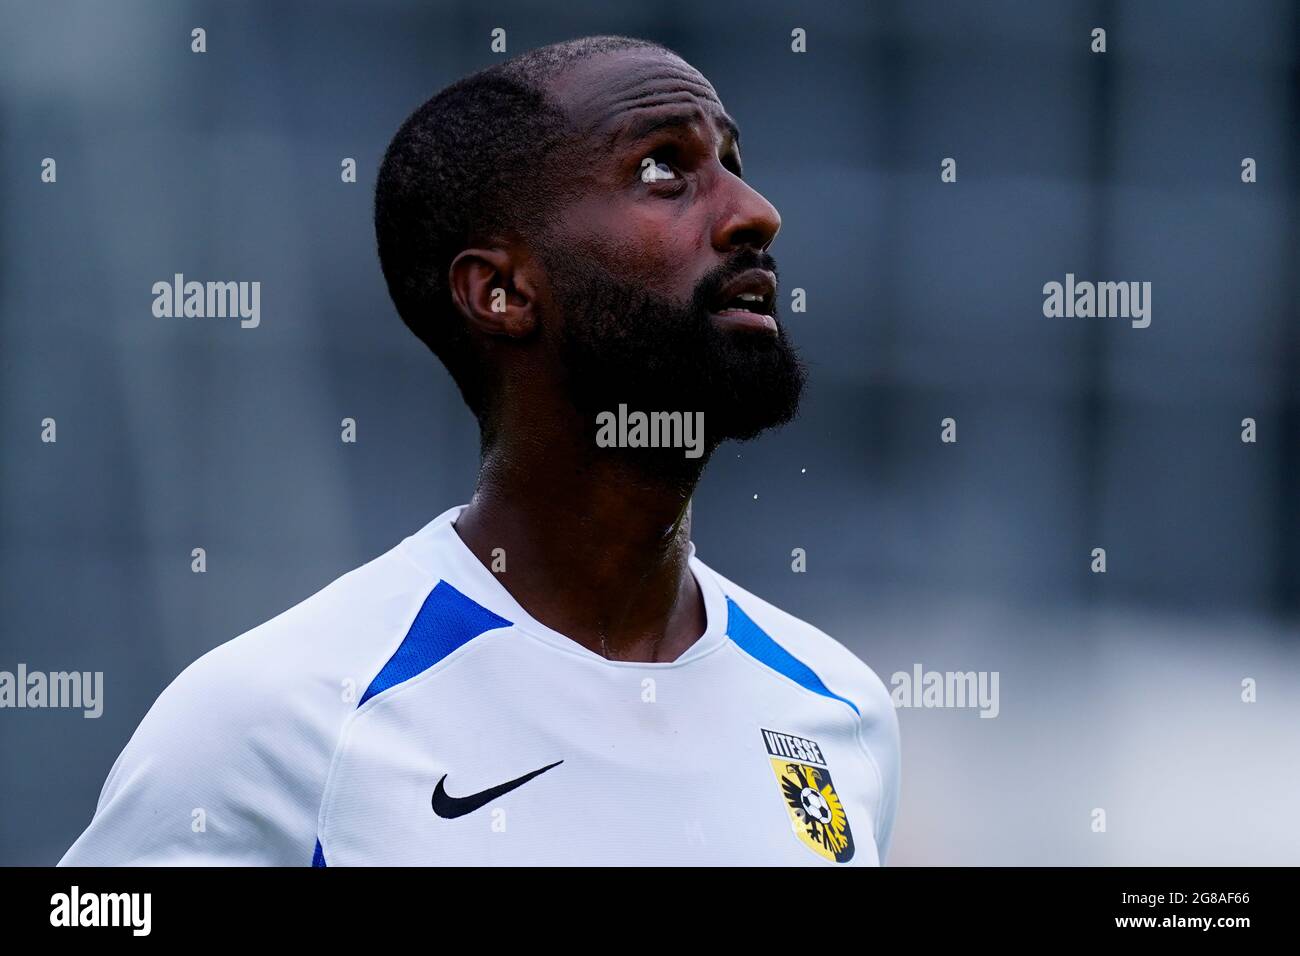 GELSENKIRCHEN, NETHERLANDS - JULY 16: Eliezer Dasa of Vitesse during the Club Friendly match between FC Schalke'04 and Vitesse at Parkstadion on July 16, 2021 in Gelsenkirchen, Netherlands (Photo by Joris Verwijst/Orange Pictures) Stock Photo